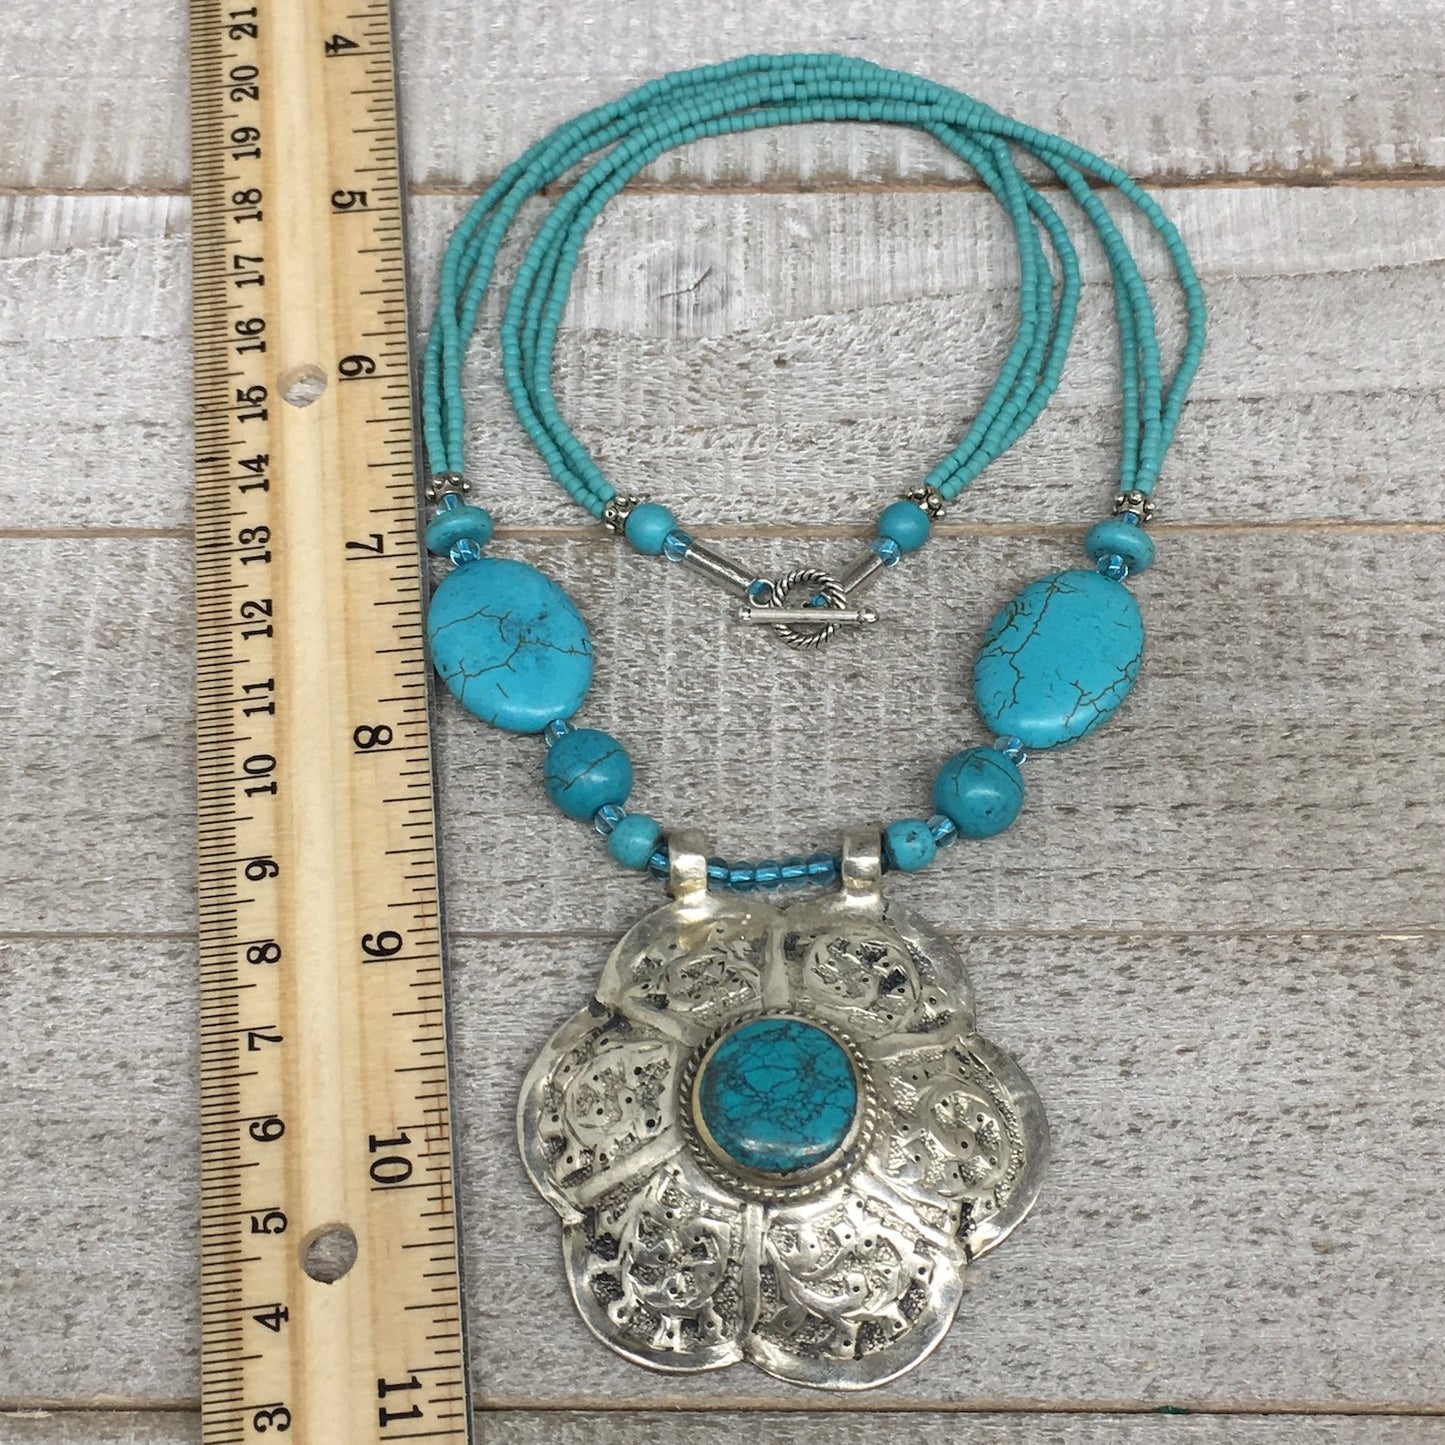 1pc,Turkmen Necklace Pendant Statement Tribal Turquoise Inlay Beaded,20-21",BN23